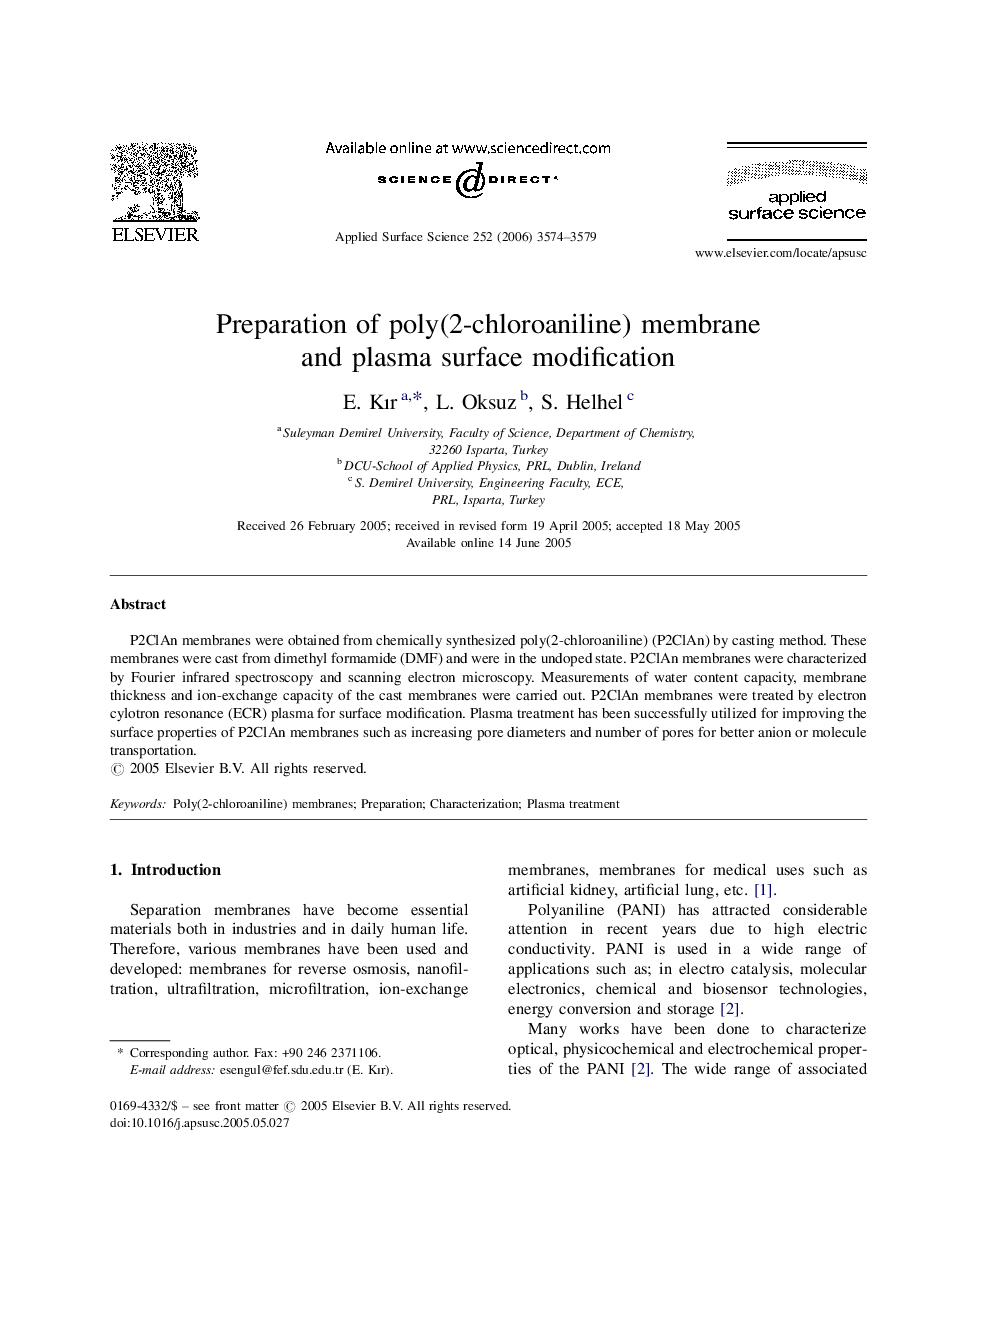 Preparation of poly(2-chloroaniline) membrane and plasma surface modification